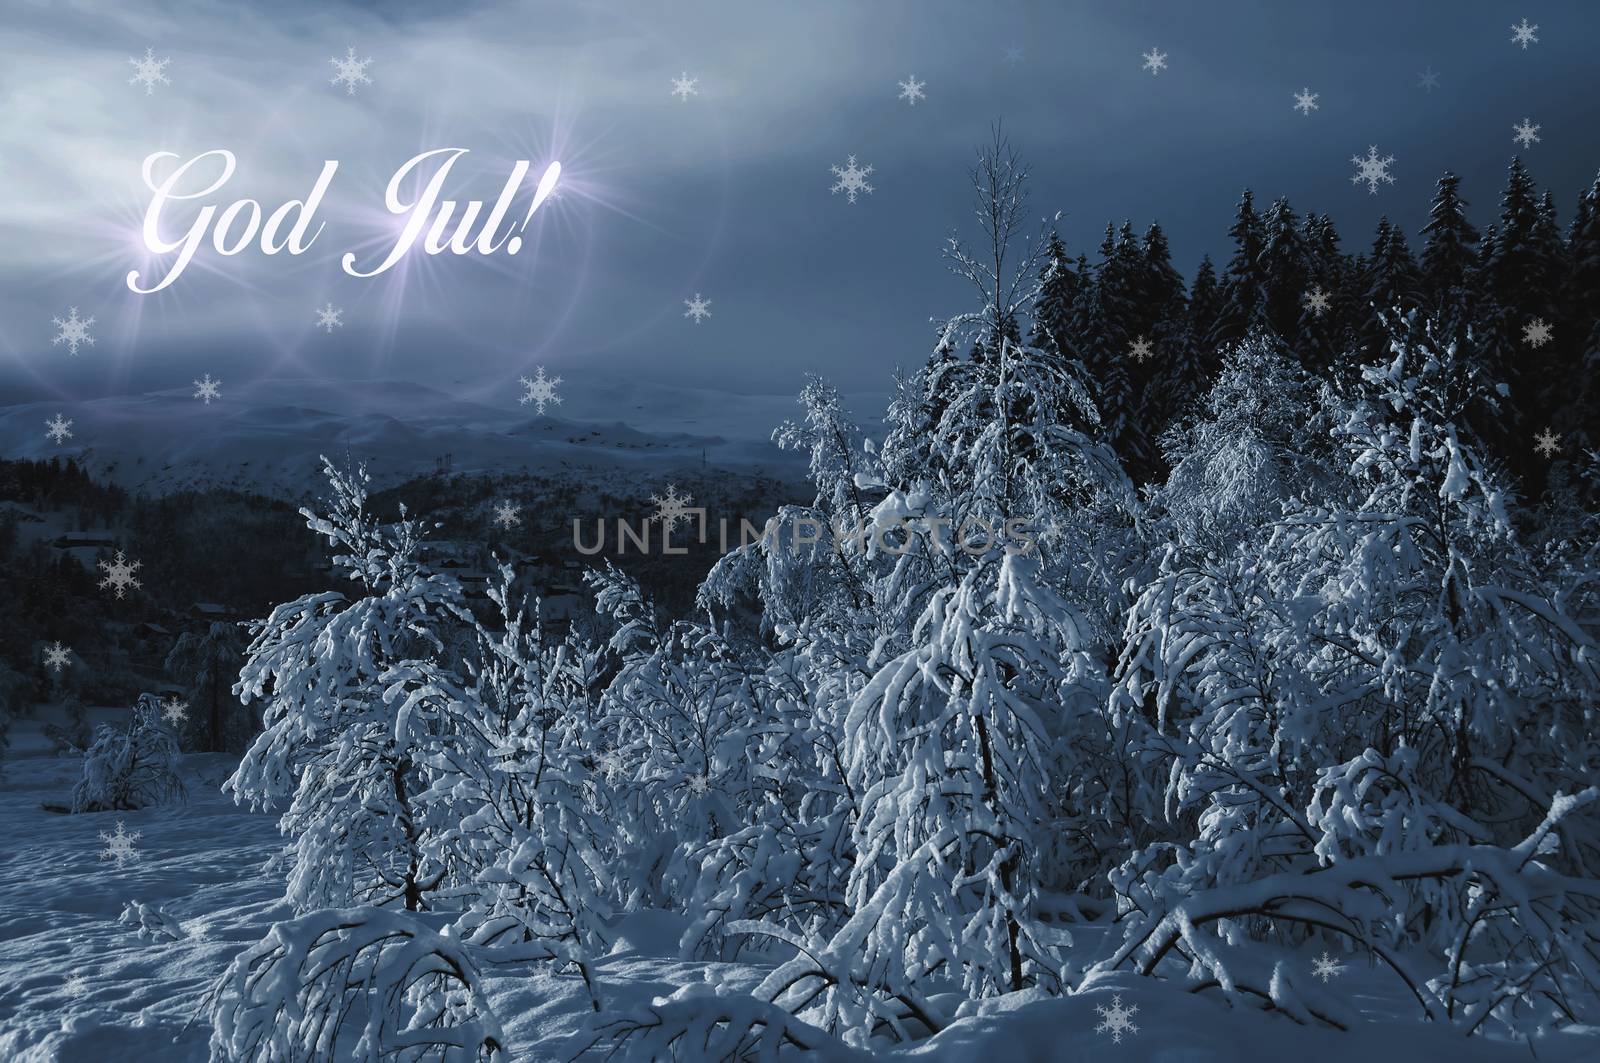 Snow covered trees and the Scandinavian text: God Jul!